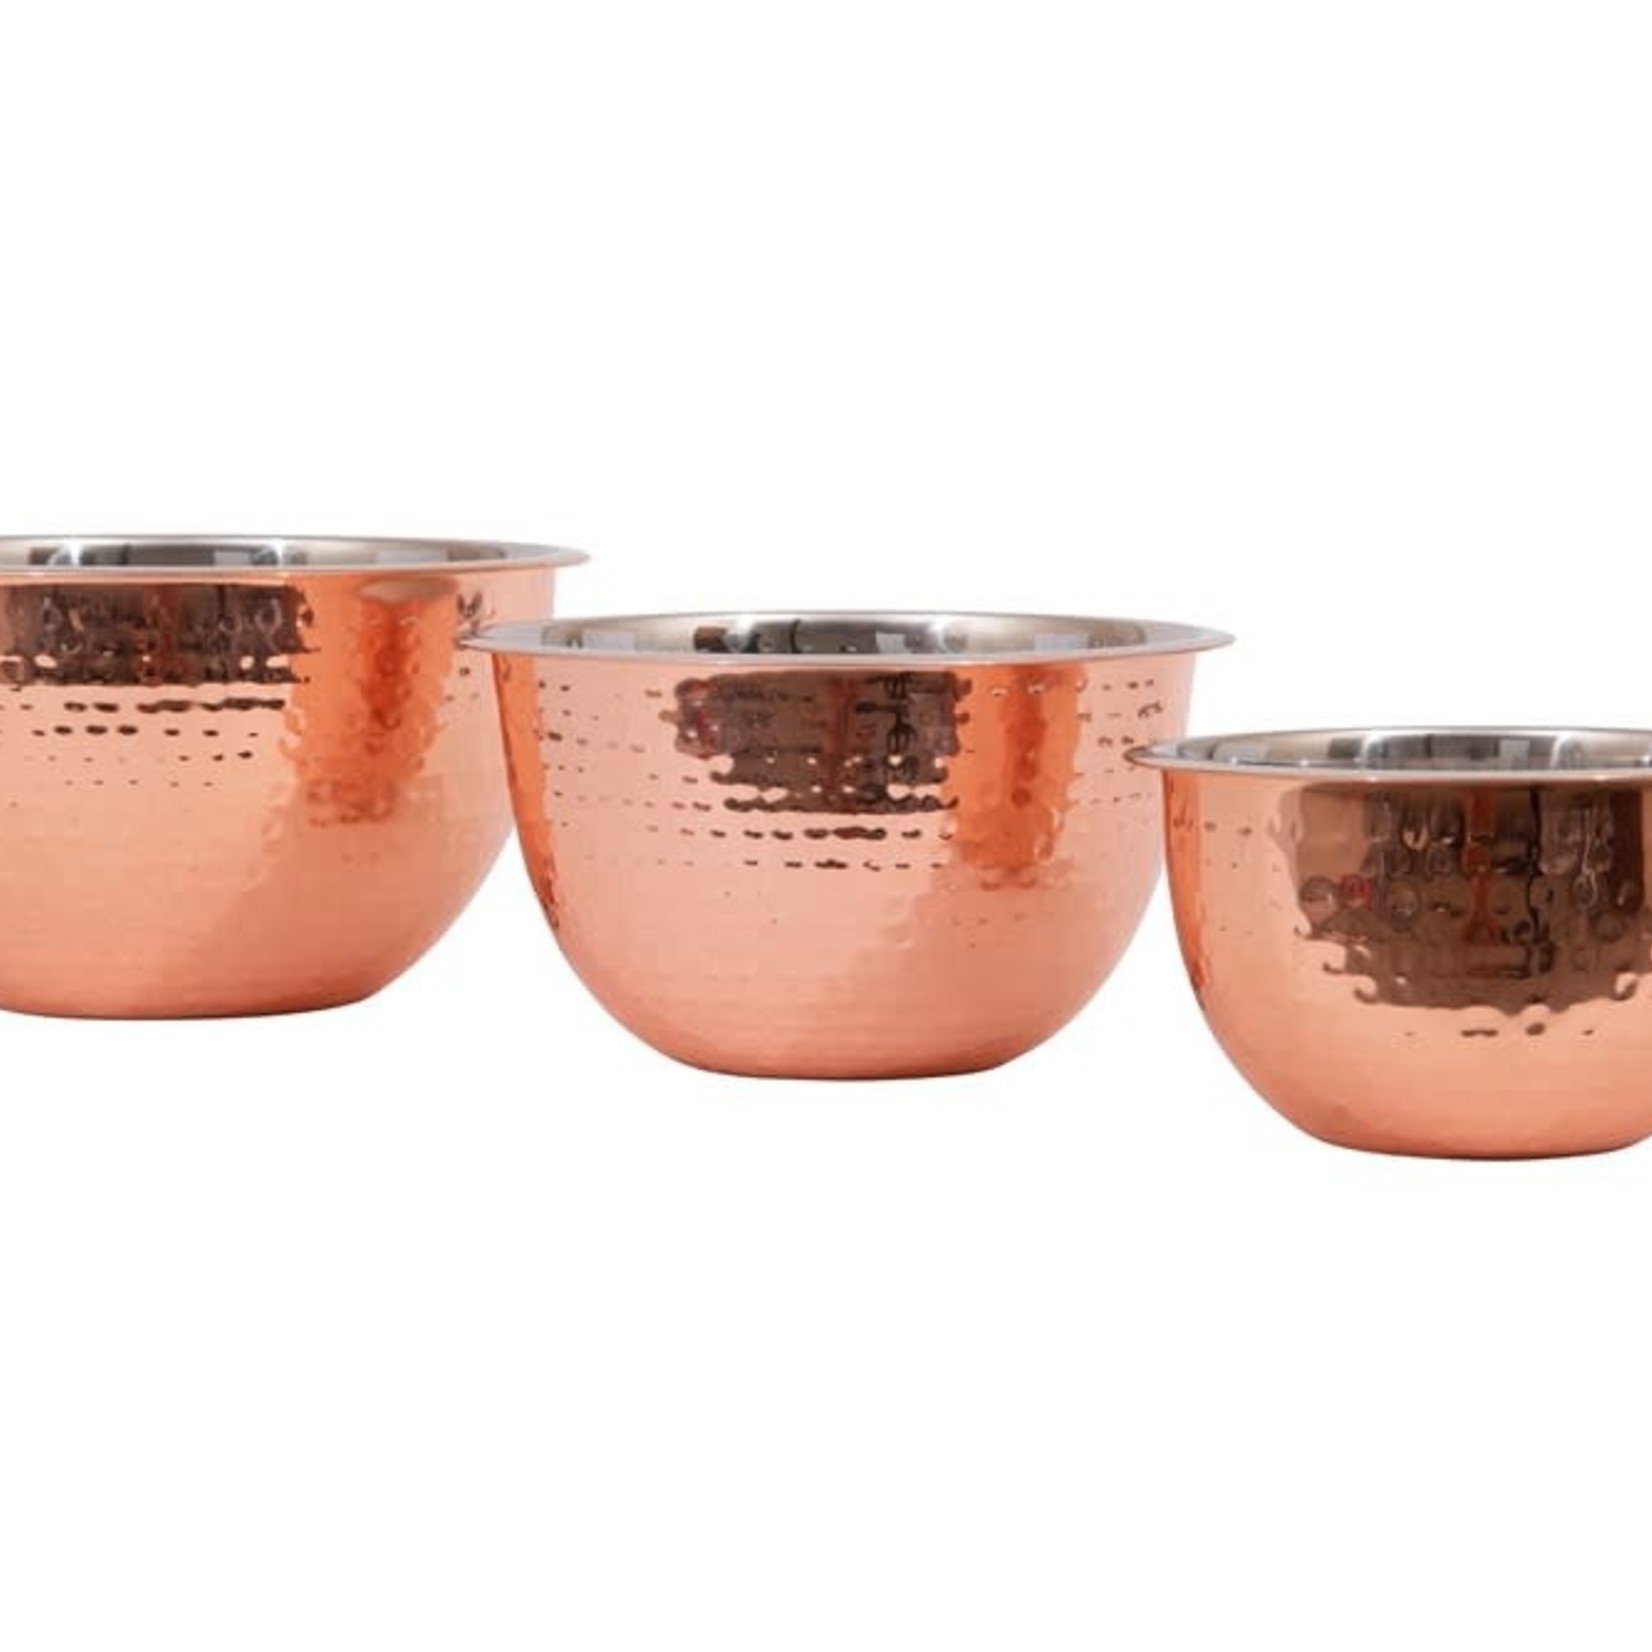 Hammered Stainless Steel Bowls in Copper Finish - Set of 3